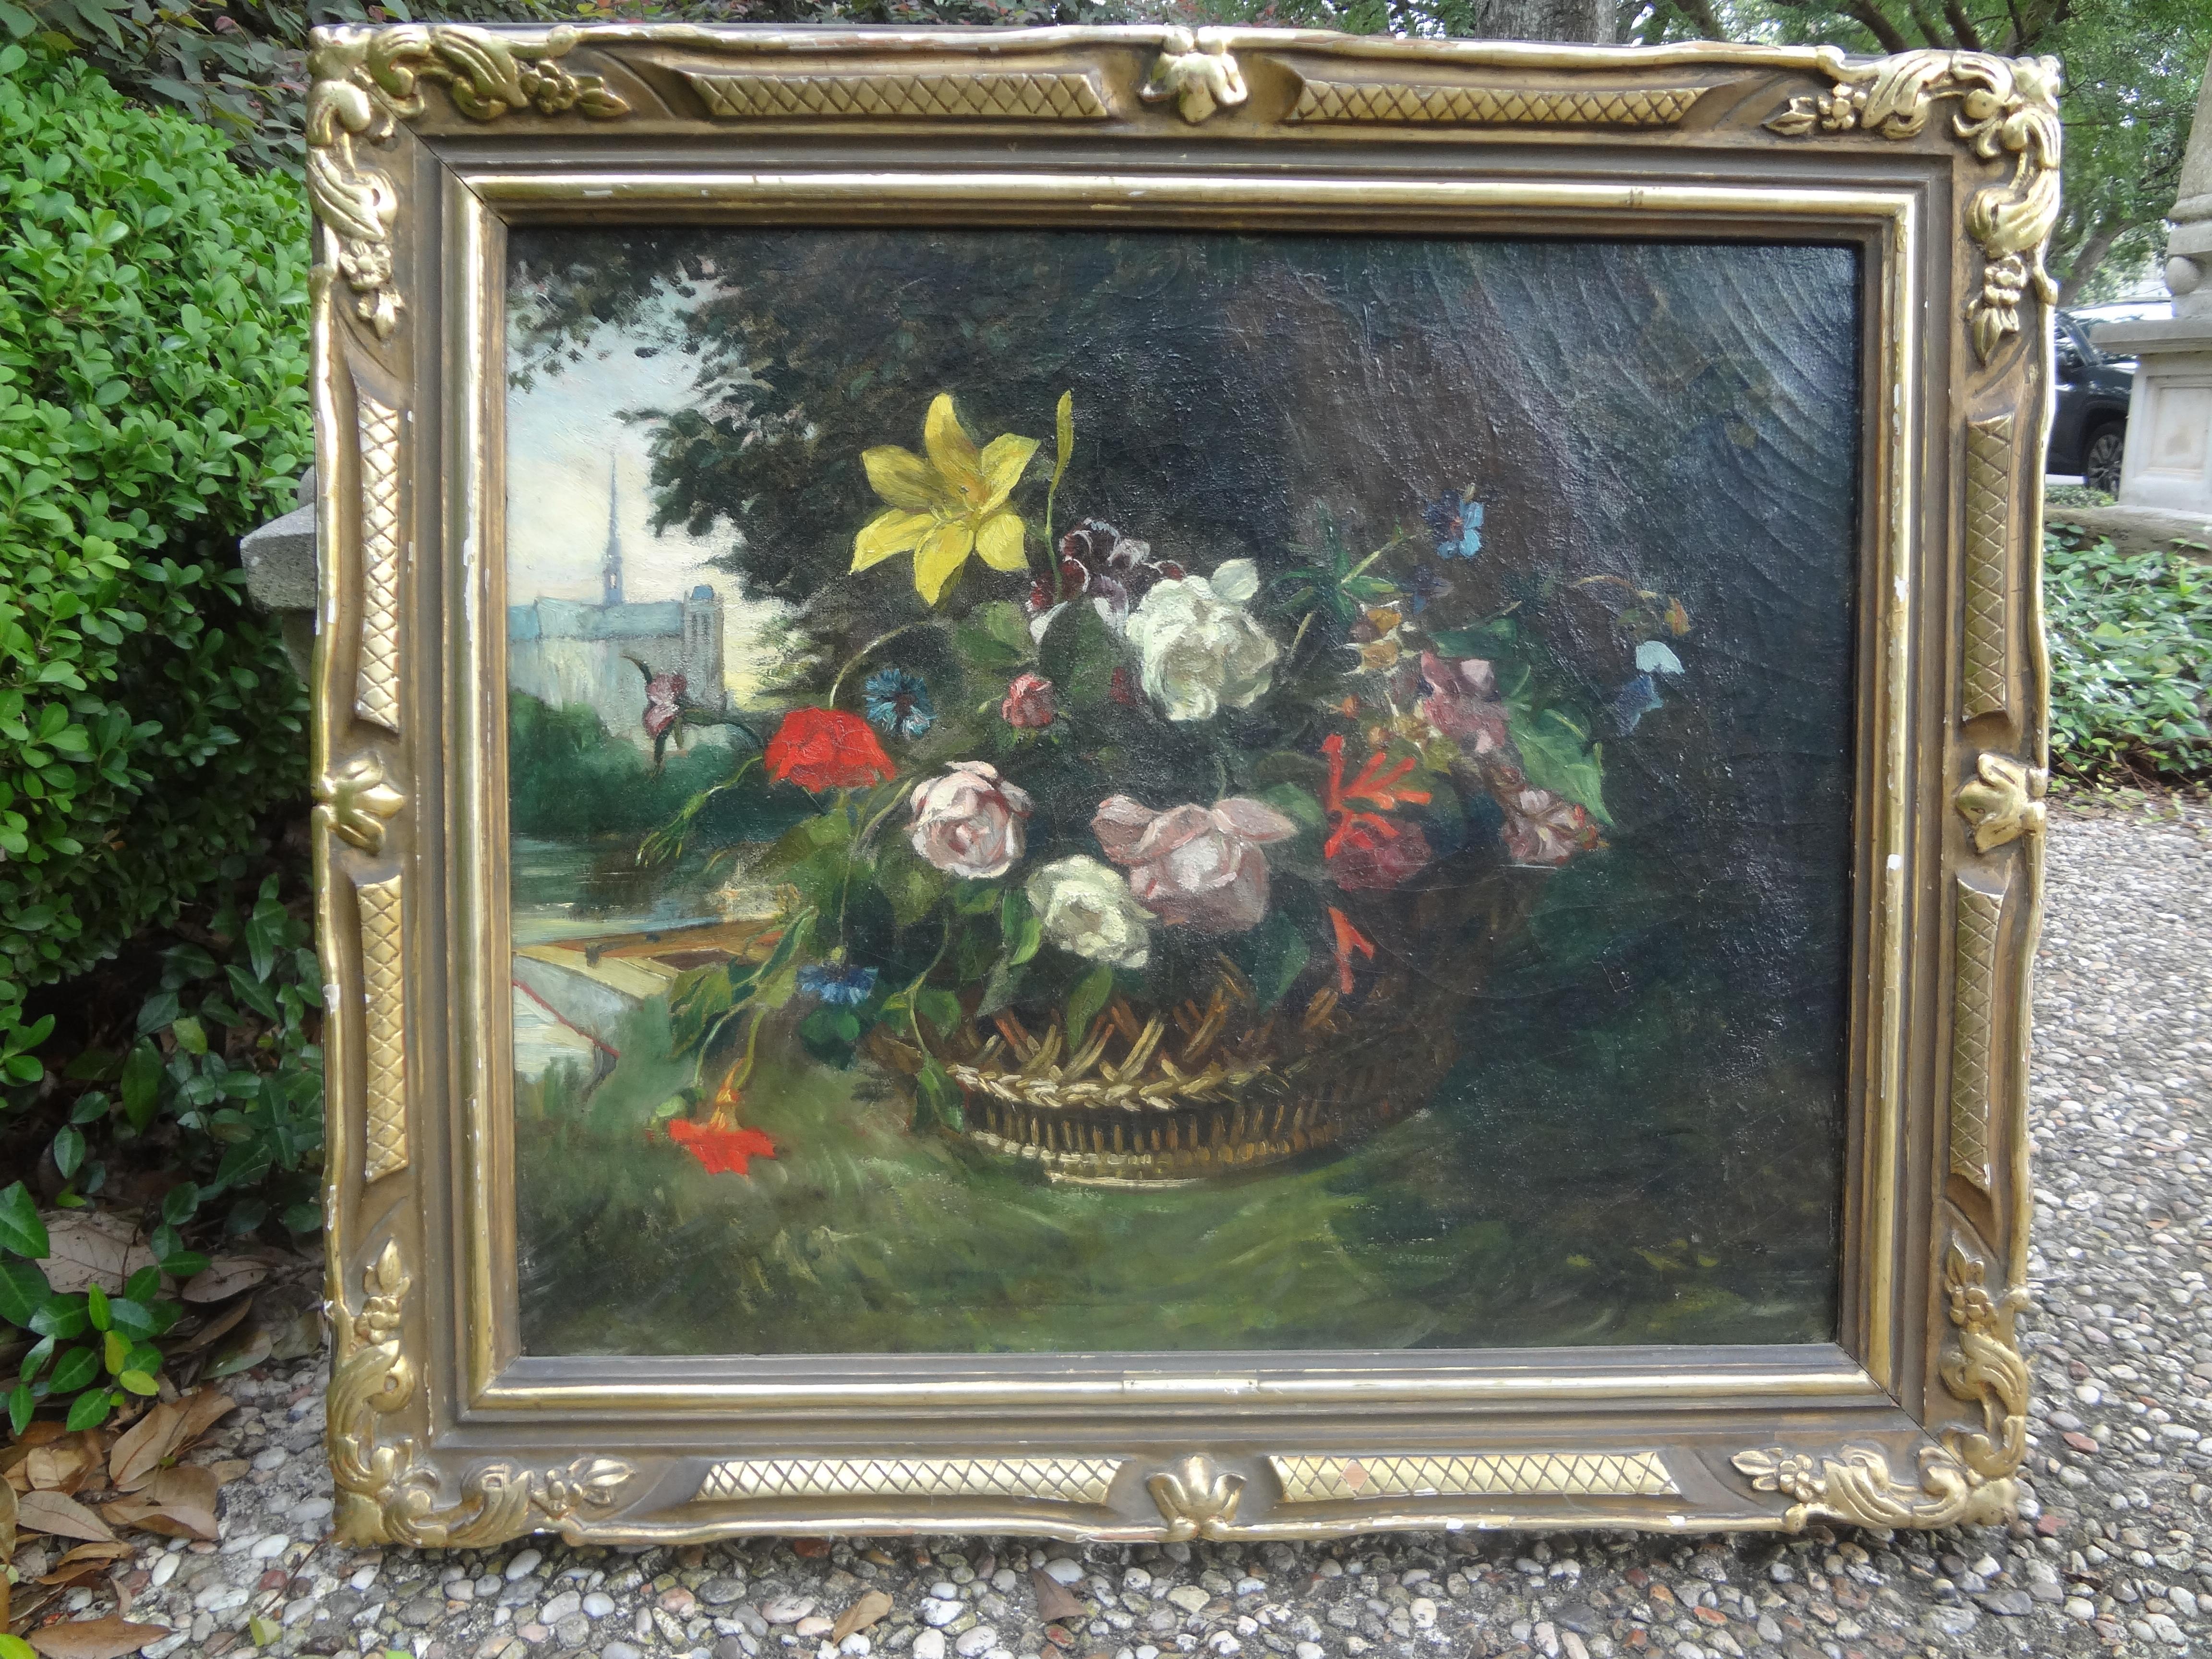 19th century French framed floral oil painting.
Stunning 19th century French framed oil on canvas painting. This gorgeous well executed Barbizon School oil painting depicts a basket placed outdoors with a lovely selection of seasonal flowers in a